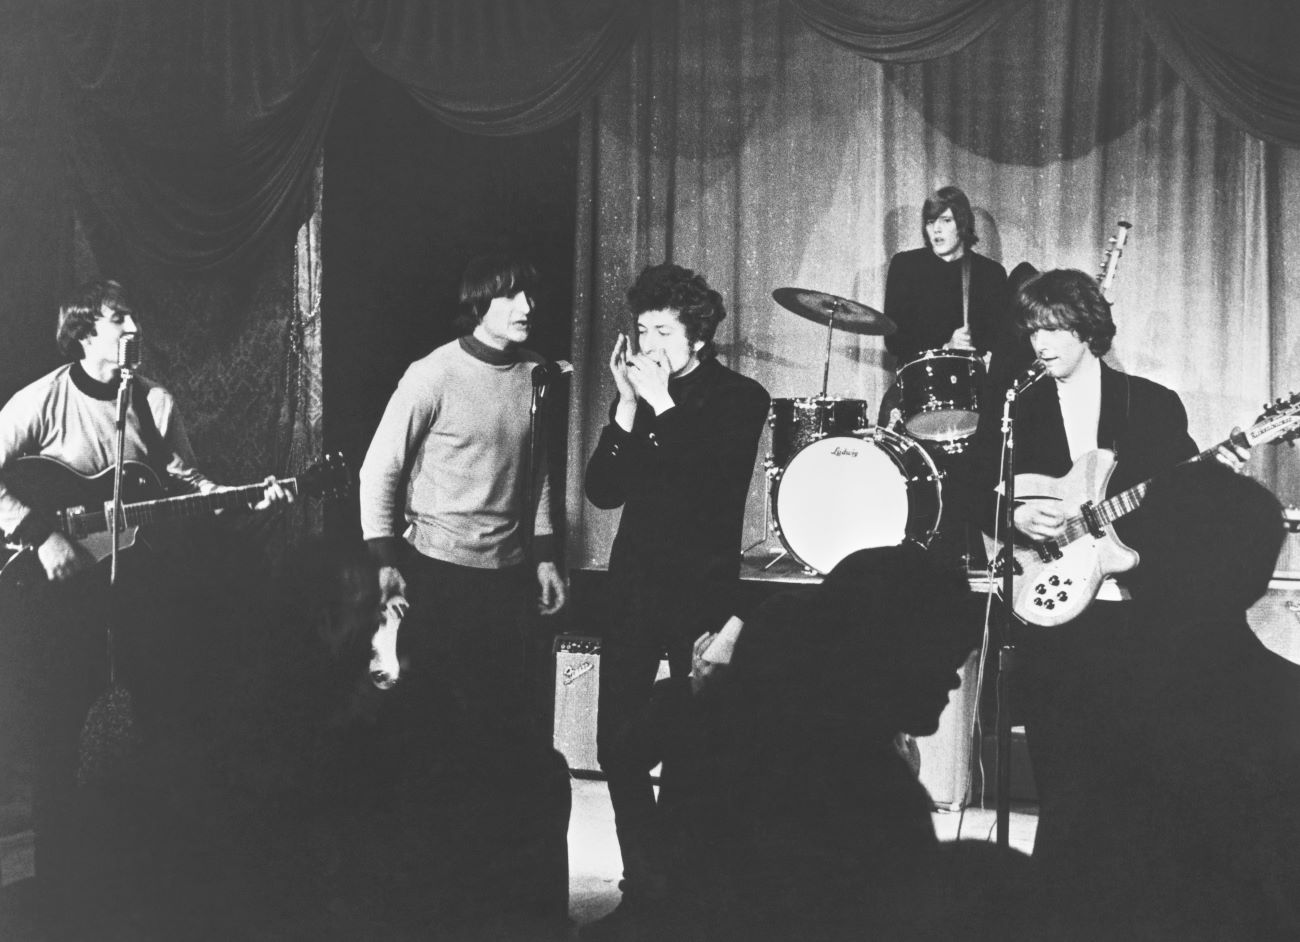 A black and white photo of Bob Dylan playing harmonica with The Byrds.